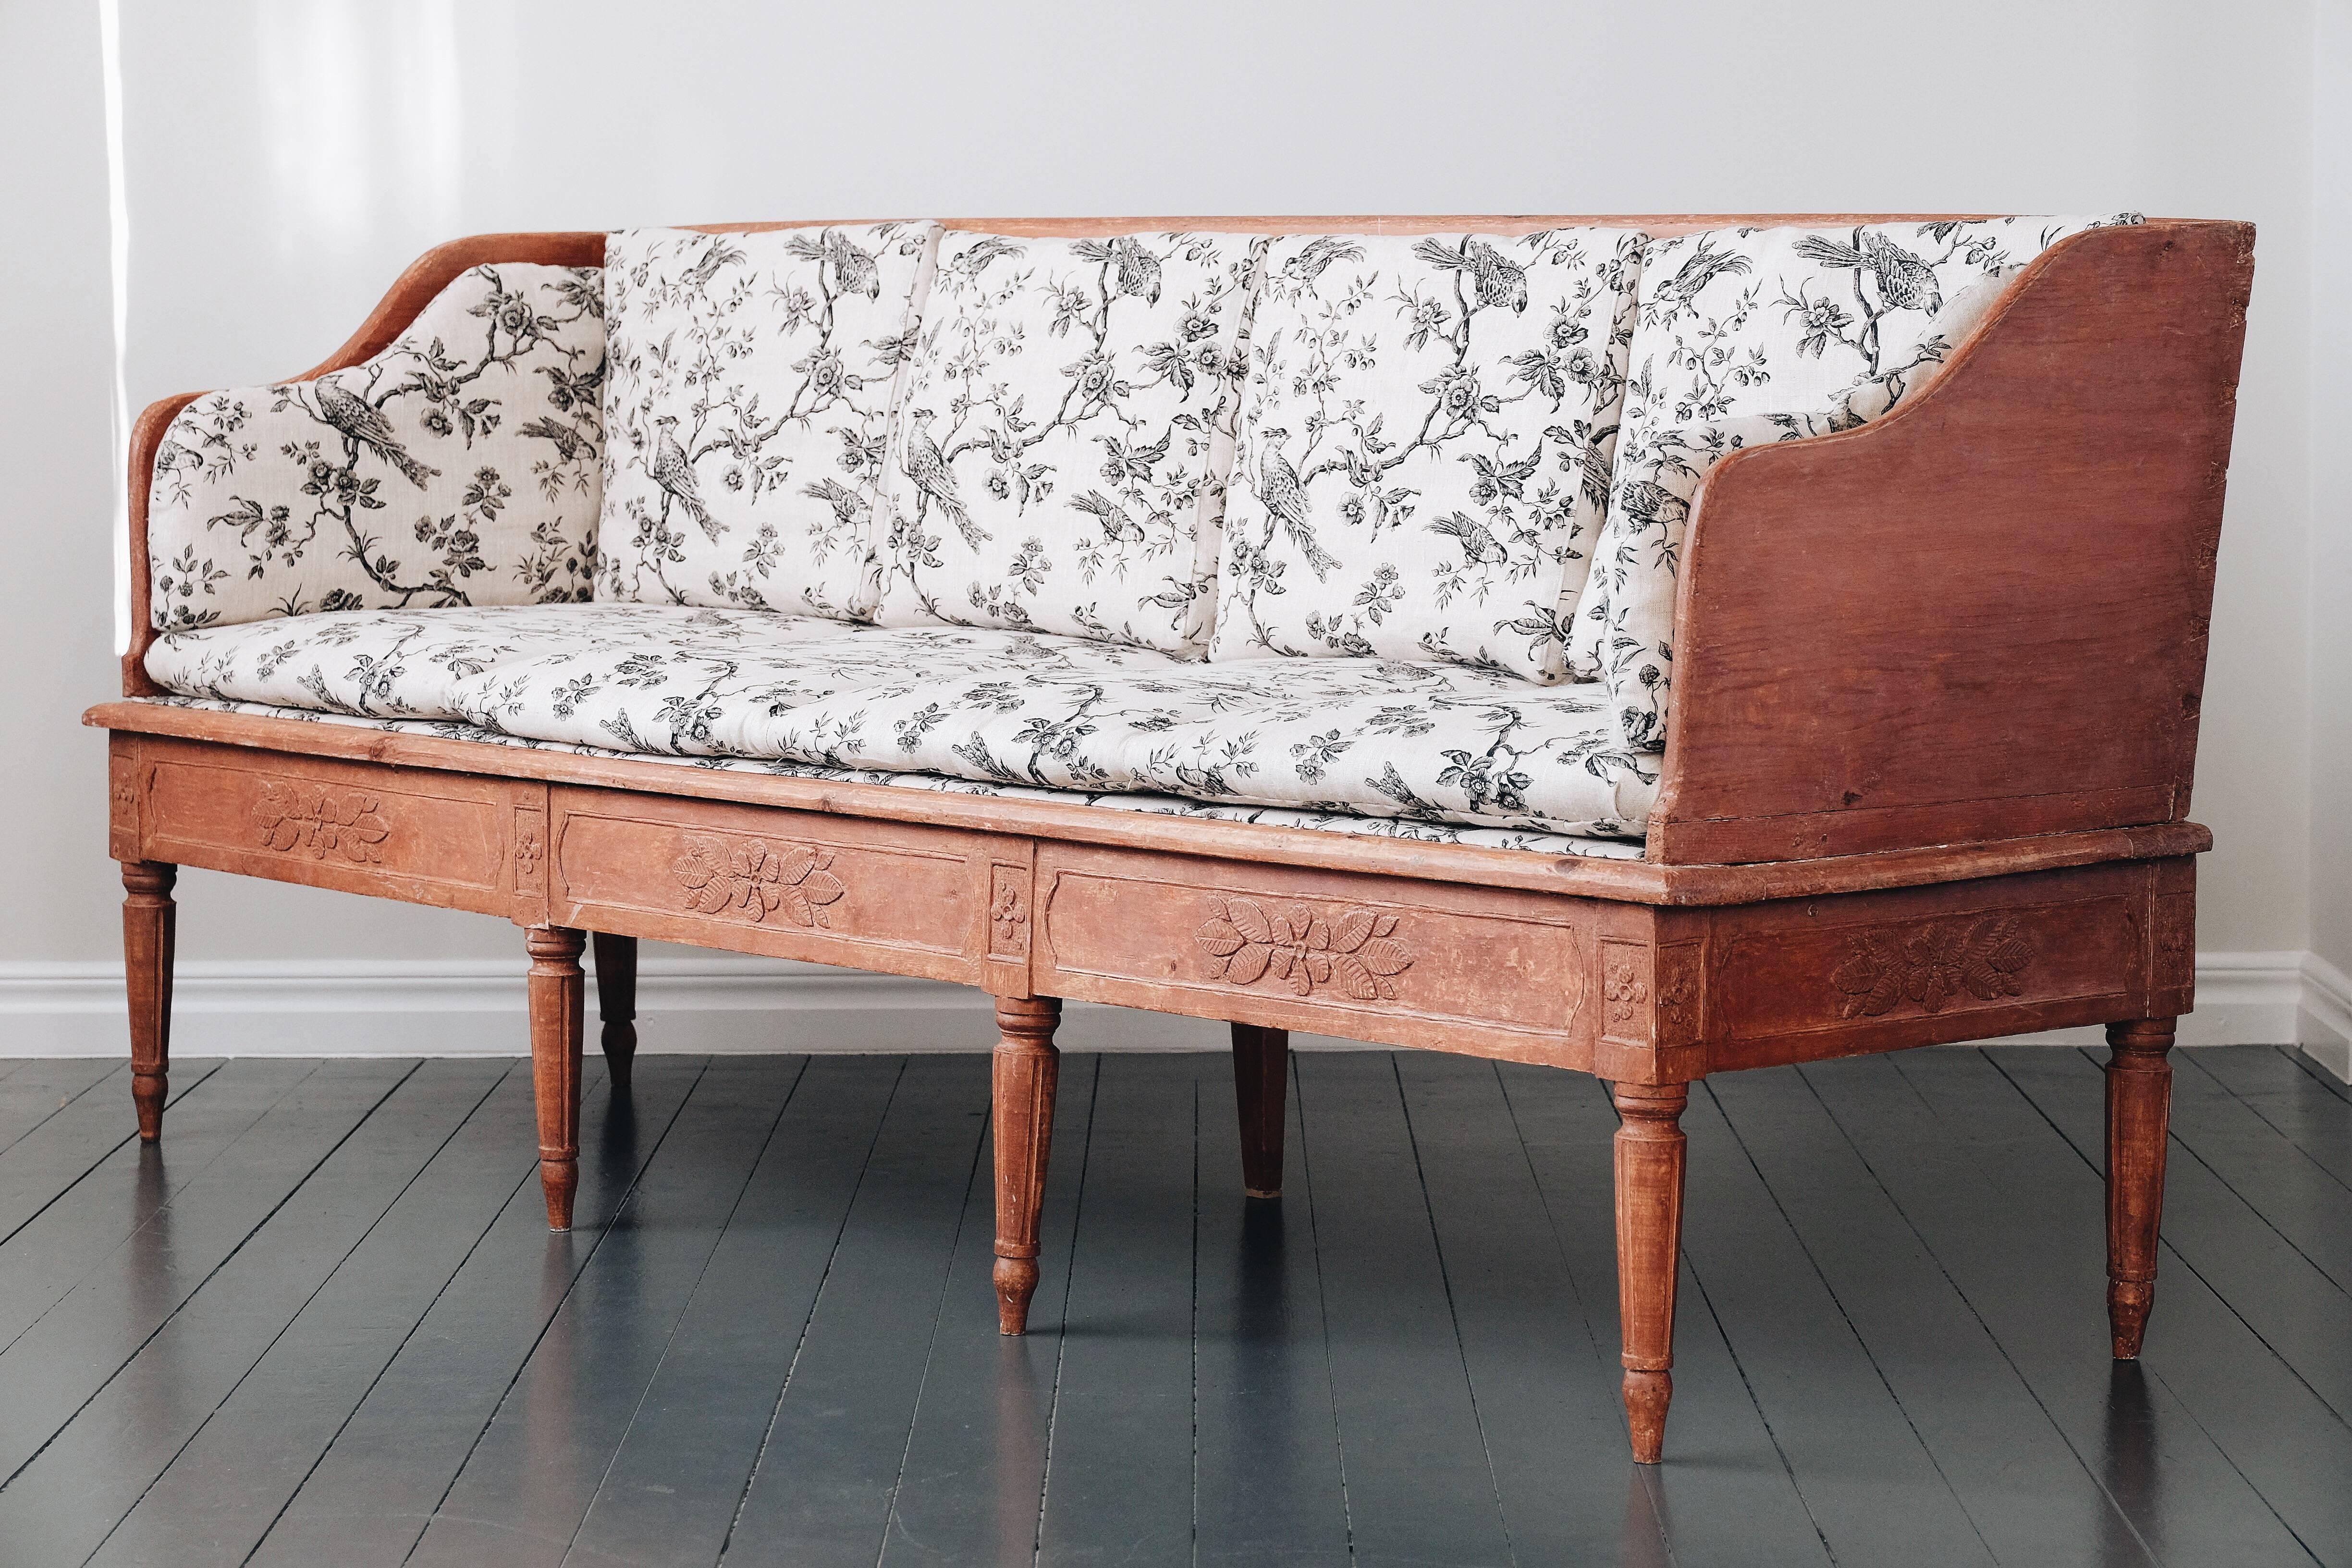 Fine 19th century Gustavian sofa in original colour with fine floral carvings, Sweden, circa 1800. 

Condition: Good.

Wear: Wear consistent with age and use.

Finish: Original color.

Year: circa 1800.

